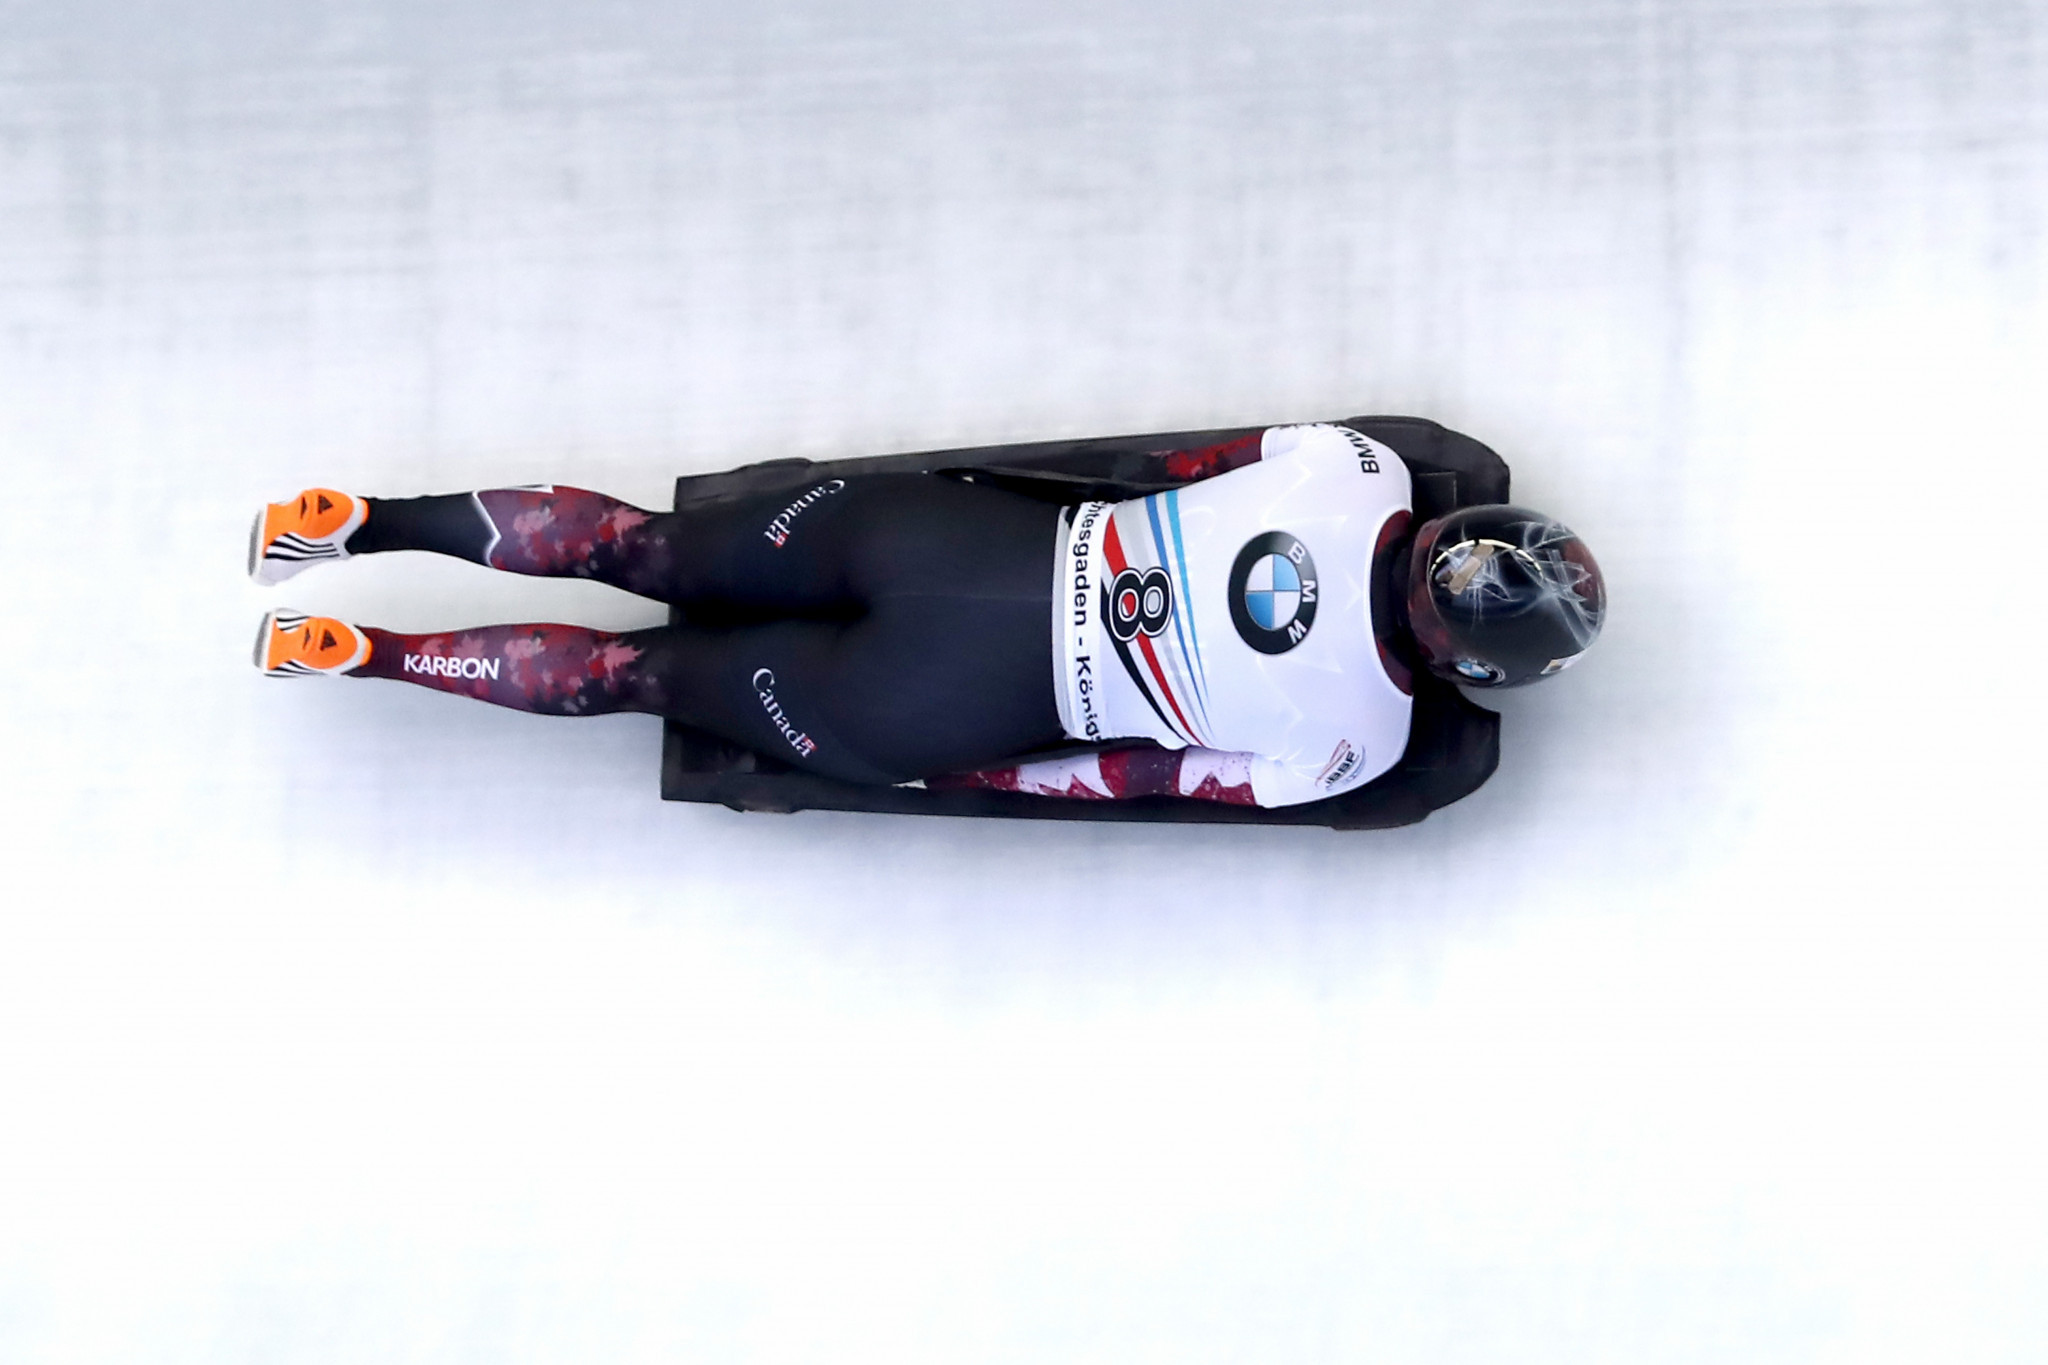 Vathje and Martineau win gold medals at Canadian National Skeleton Championships